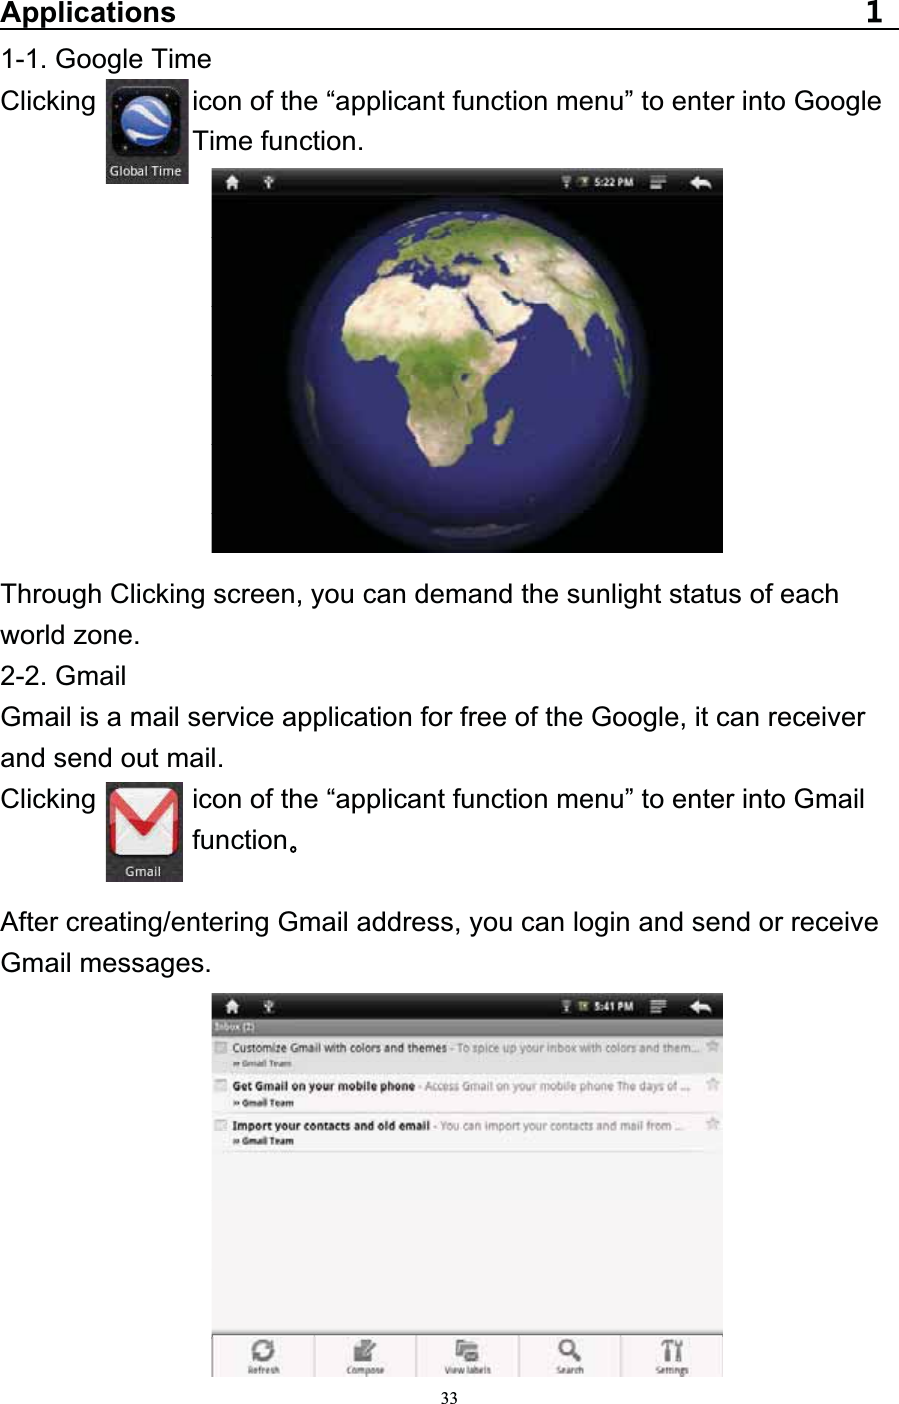   33Applications1-1. Google Time Clicking       icon of the “applicant function menu” to enter into Google  Time function.           Through Clicking screen, you can demand the sunlight status of each world zone.   2-2. Gmail Gmail is a mail service application for free of the Google, it can receiver and send out mail. Clicking              icon of the “applicant function menu” to enter into Gmail   function   After creating/entering Gmail address, you can login and send or receive Gmail messages. 